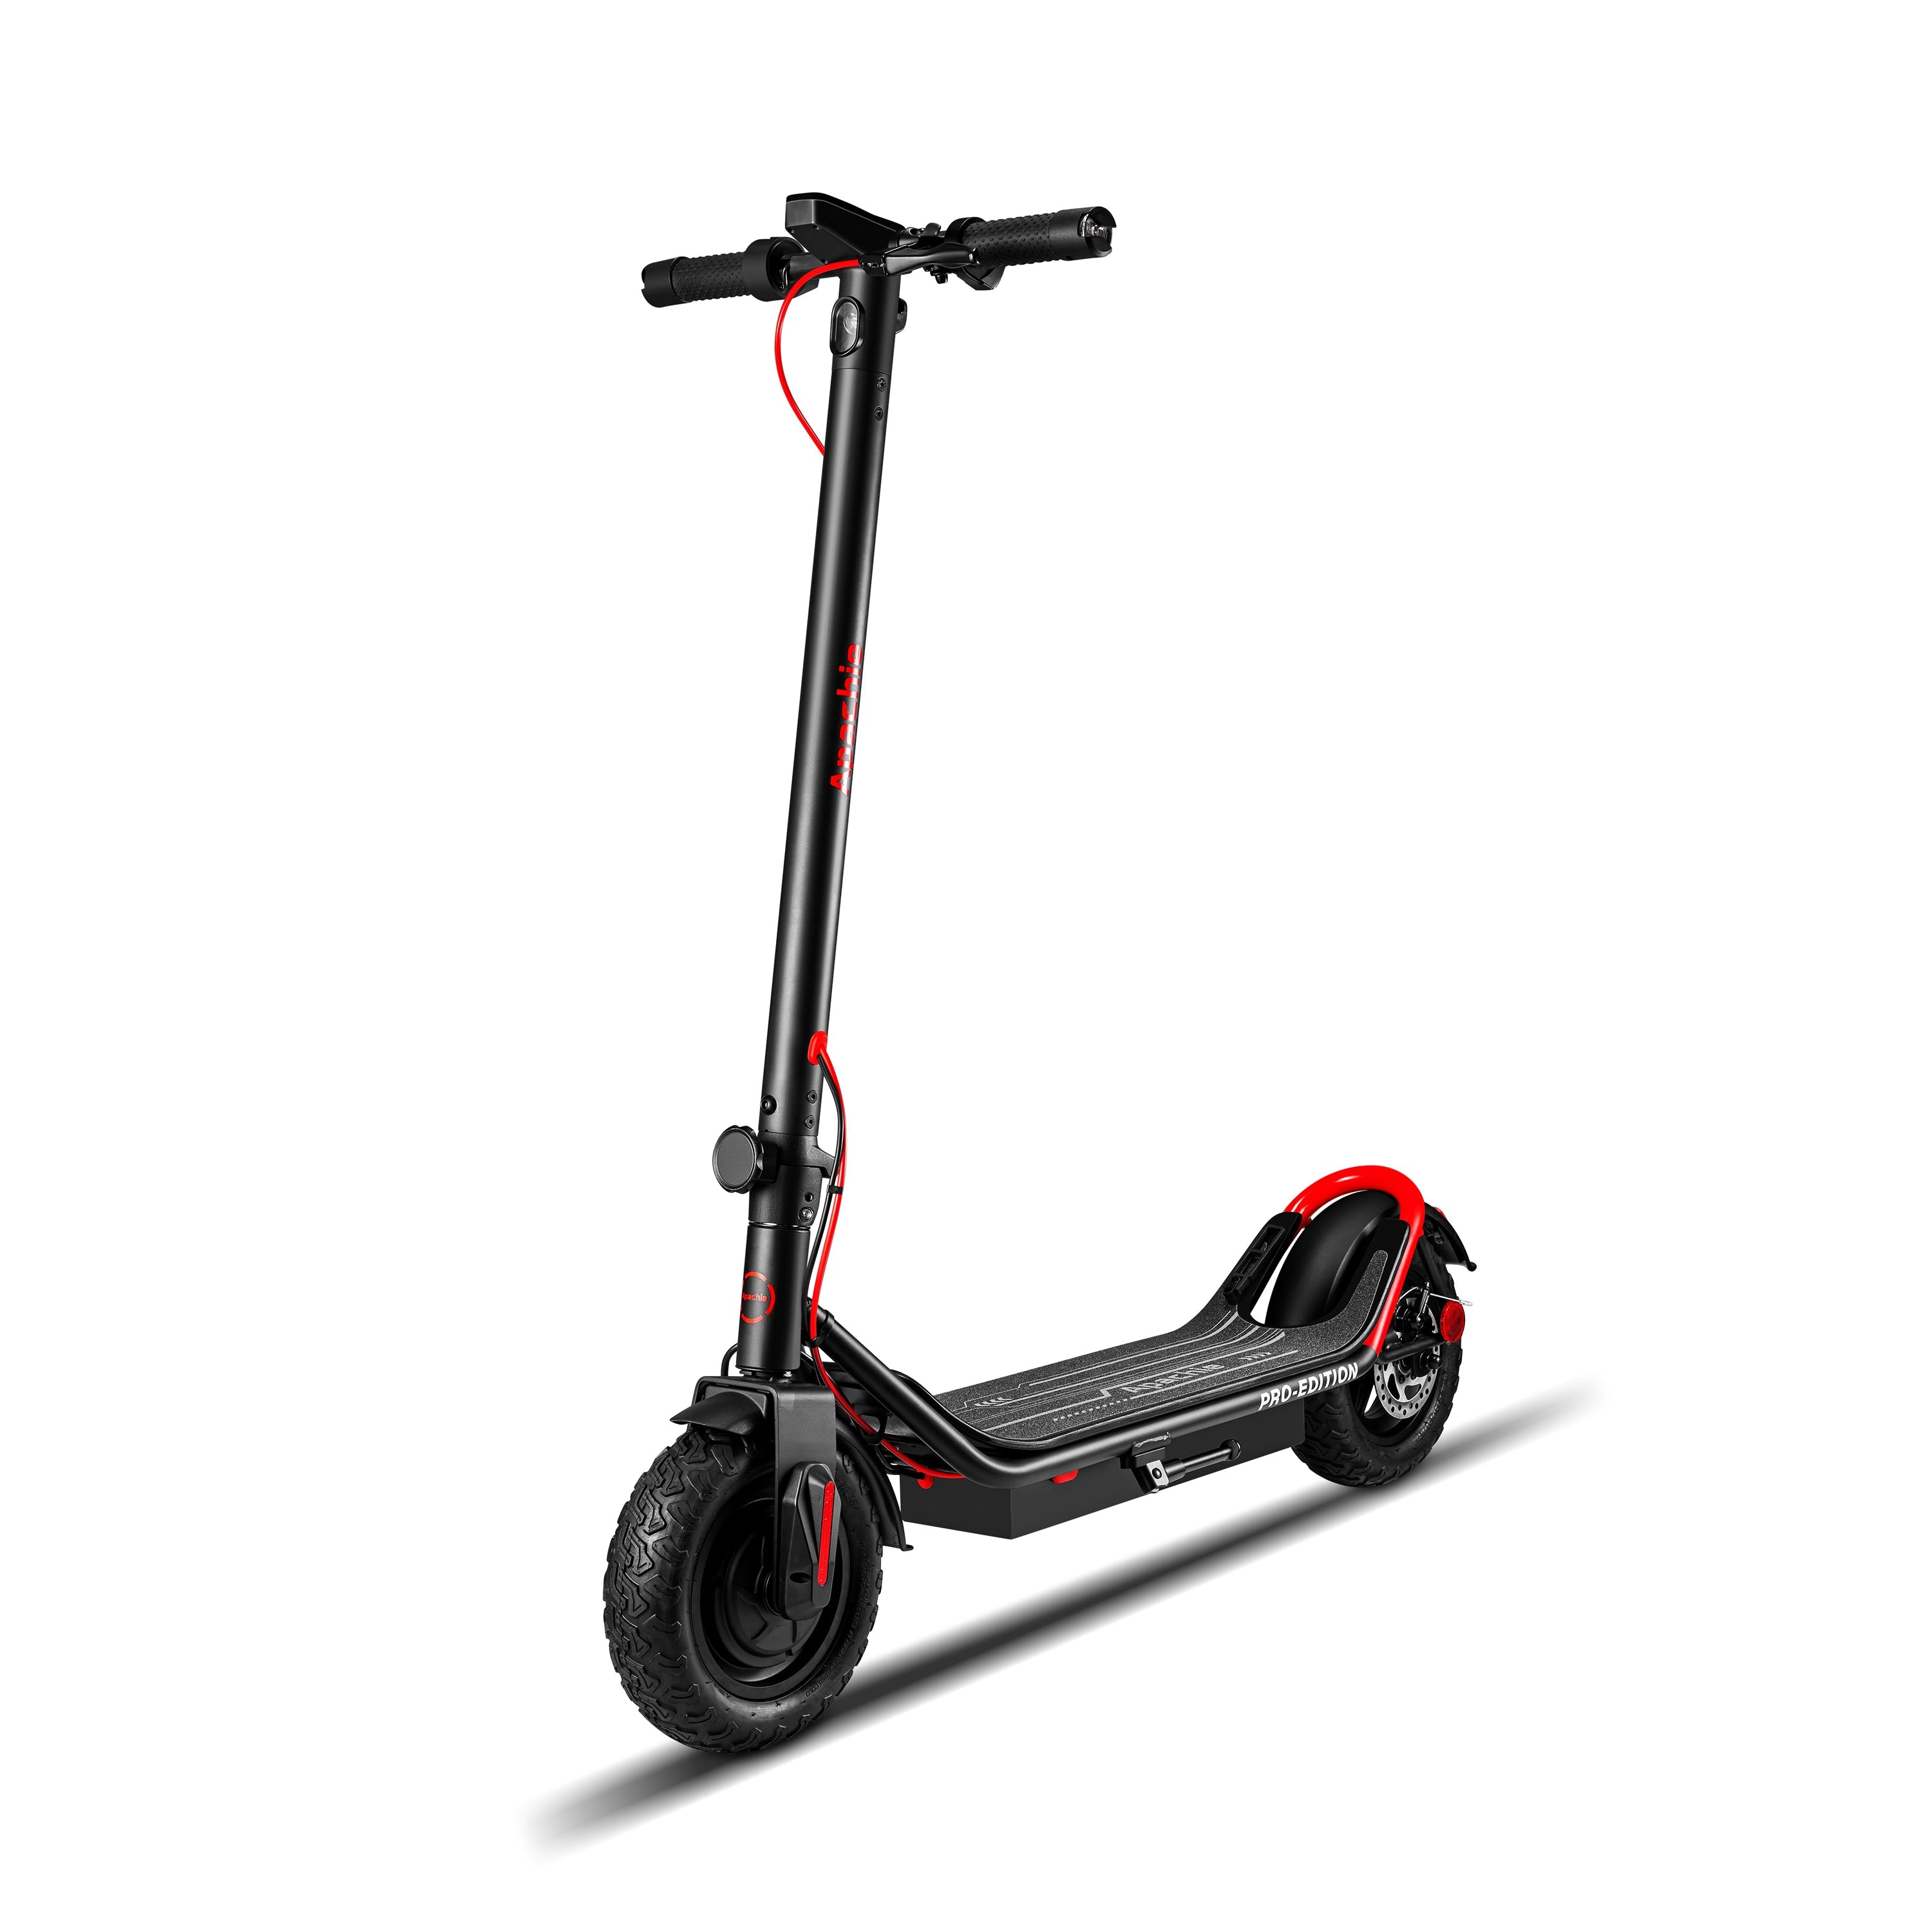 Apachie Pro Edition 500W Red Electric Scooter Refurbished